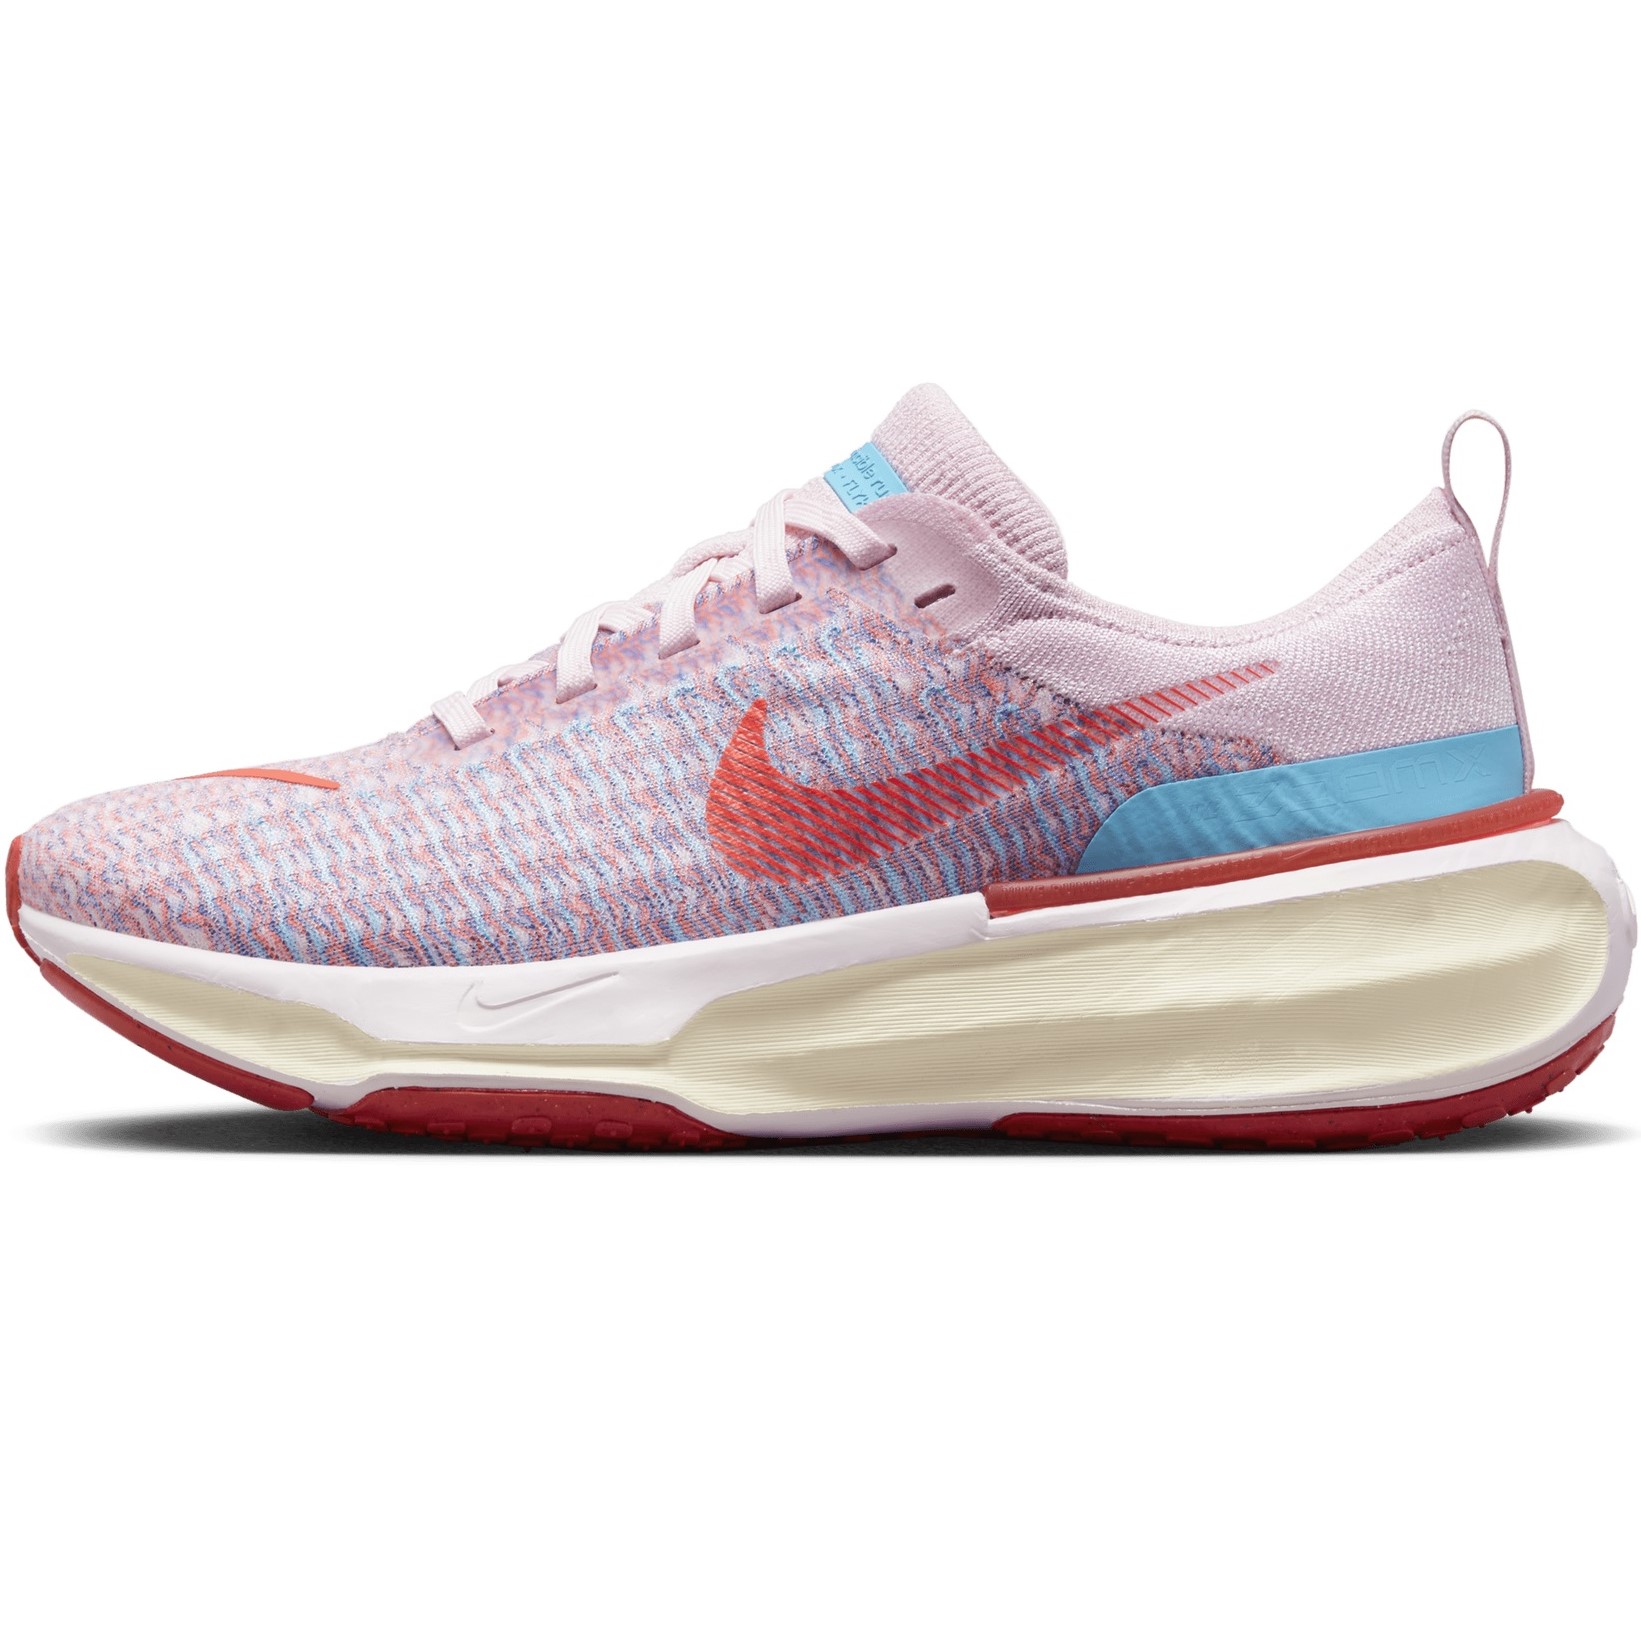 GIÀY NIKE NỮ WOMENS ZOOMX INVINCIBLE 3 ROAD RUNNING SHOES PINK FOAM RACER BLUE DR2660-600 9